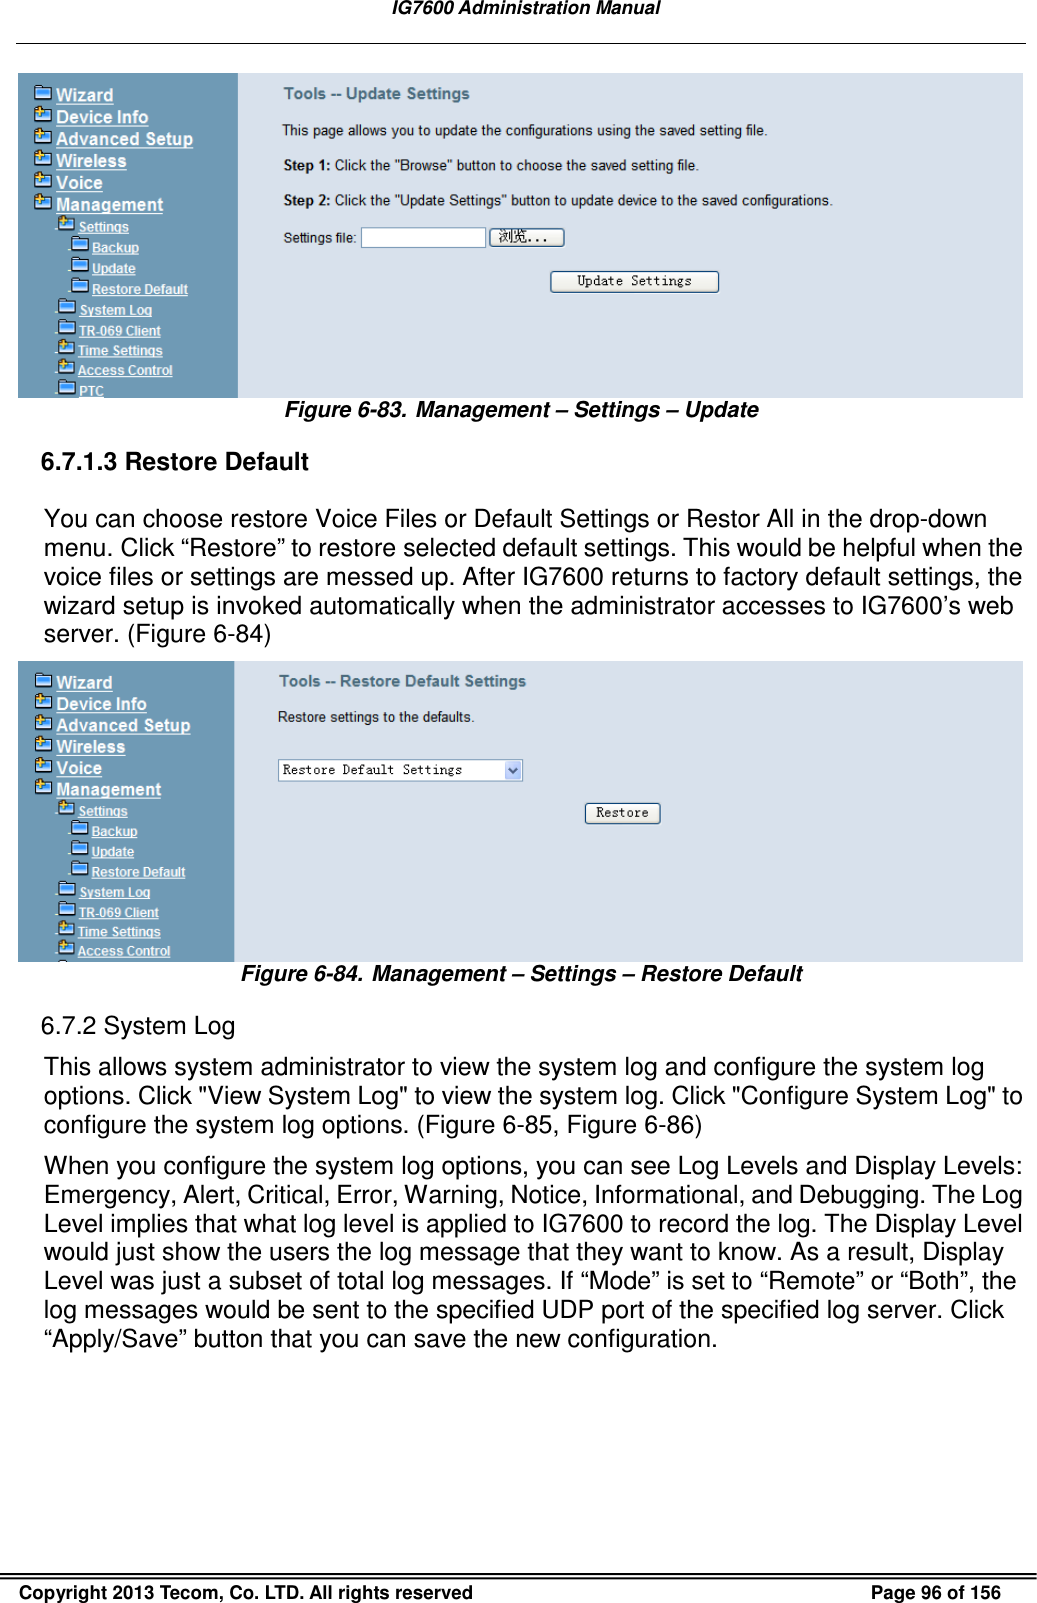   IG7600 Administration Manual  Copyright 2013 Tecom, Co. LTD. All rights reserved  Page 96 of 156  Figure 6-83. Management – Settings – Update 6.7.1.3 Restore Default You can choose restore Voice Files or Default Settings or Restor All in the drop-down menu. Click “Restore” to restore selected default settings. This would be helpful when the voice files or settings are messed up. After IG7600 returns to factory default settings, the wizard setup is invoked automatically when the administrator accesses to IG7600’s web server. (Figure 6-84)  Figure 6-84. Management – Settings – Restore Default 6.7.2 System Log This allows system administrator to view the system log and configure the system log options. Click &quot;View System Log&quot; to view the system log. Click &quot;Configure System Log&quot; to configure the system log options. (Figure 6-85, Figure 6-86) When you configure the system log options, you can see Log Levels and Display Levels: Emergency, Alert, Critical, Error, Warning, Notice, Informational, and Debugging. The Log Level implies that what log level is applied to IG7600 to record the log. The Display Level would just show the users the log message that they want to know. As a result, Display Level was just a subset of total log messages. If “Mode” is set to “Remote” or “Both”, the log messages would be sent to the specified UDP port of the specified log server. Click “Apply/Save” button that you can save the new configuration.   